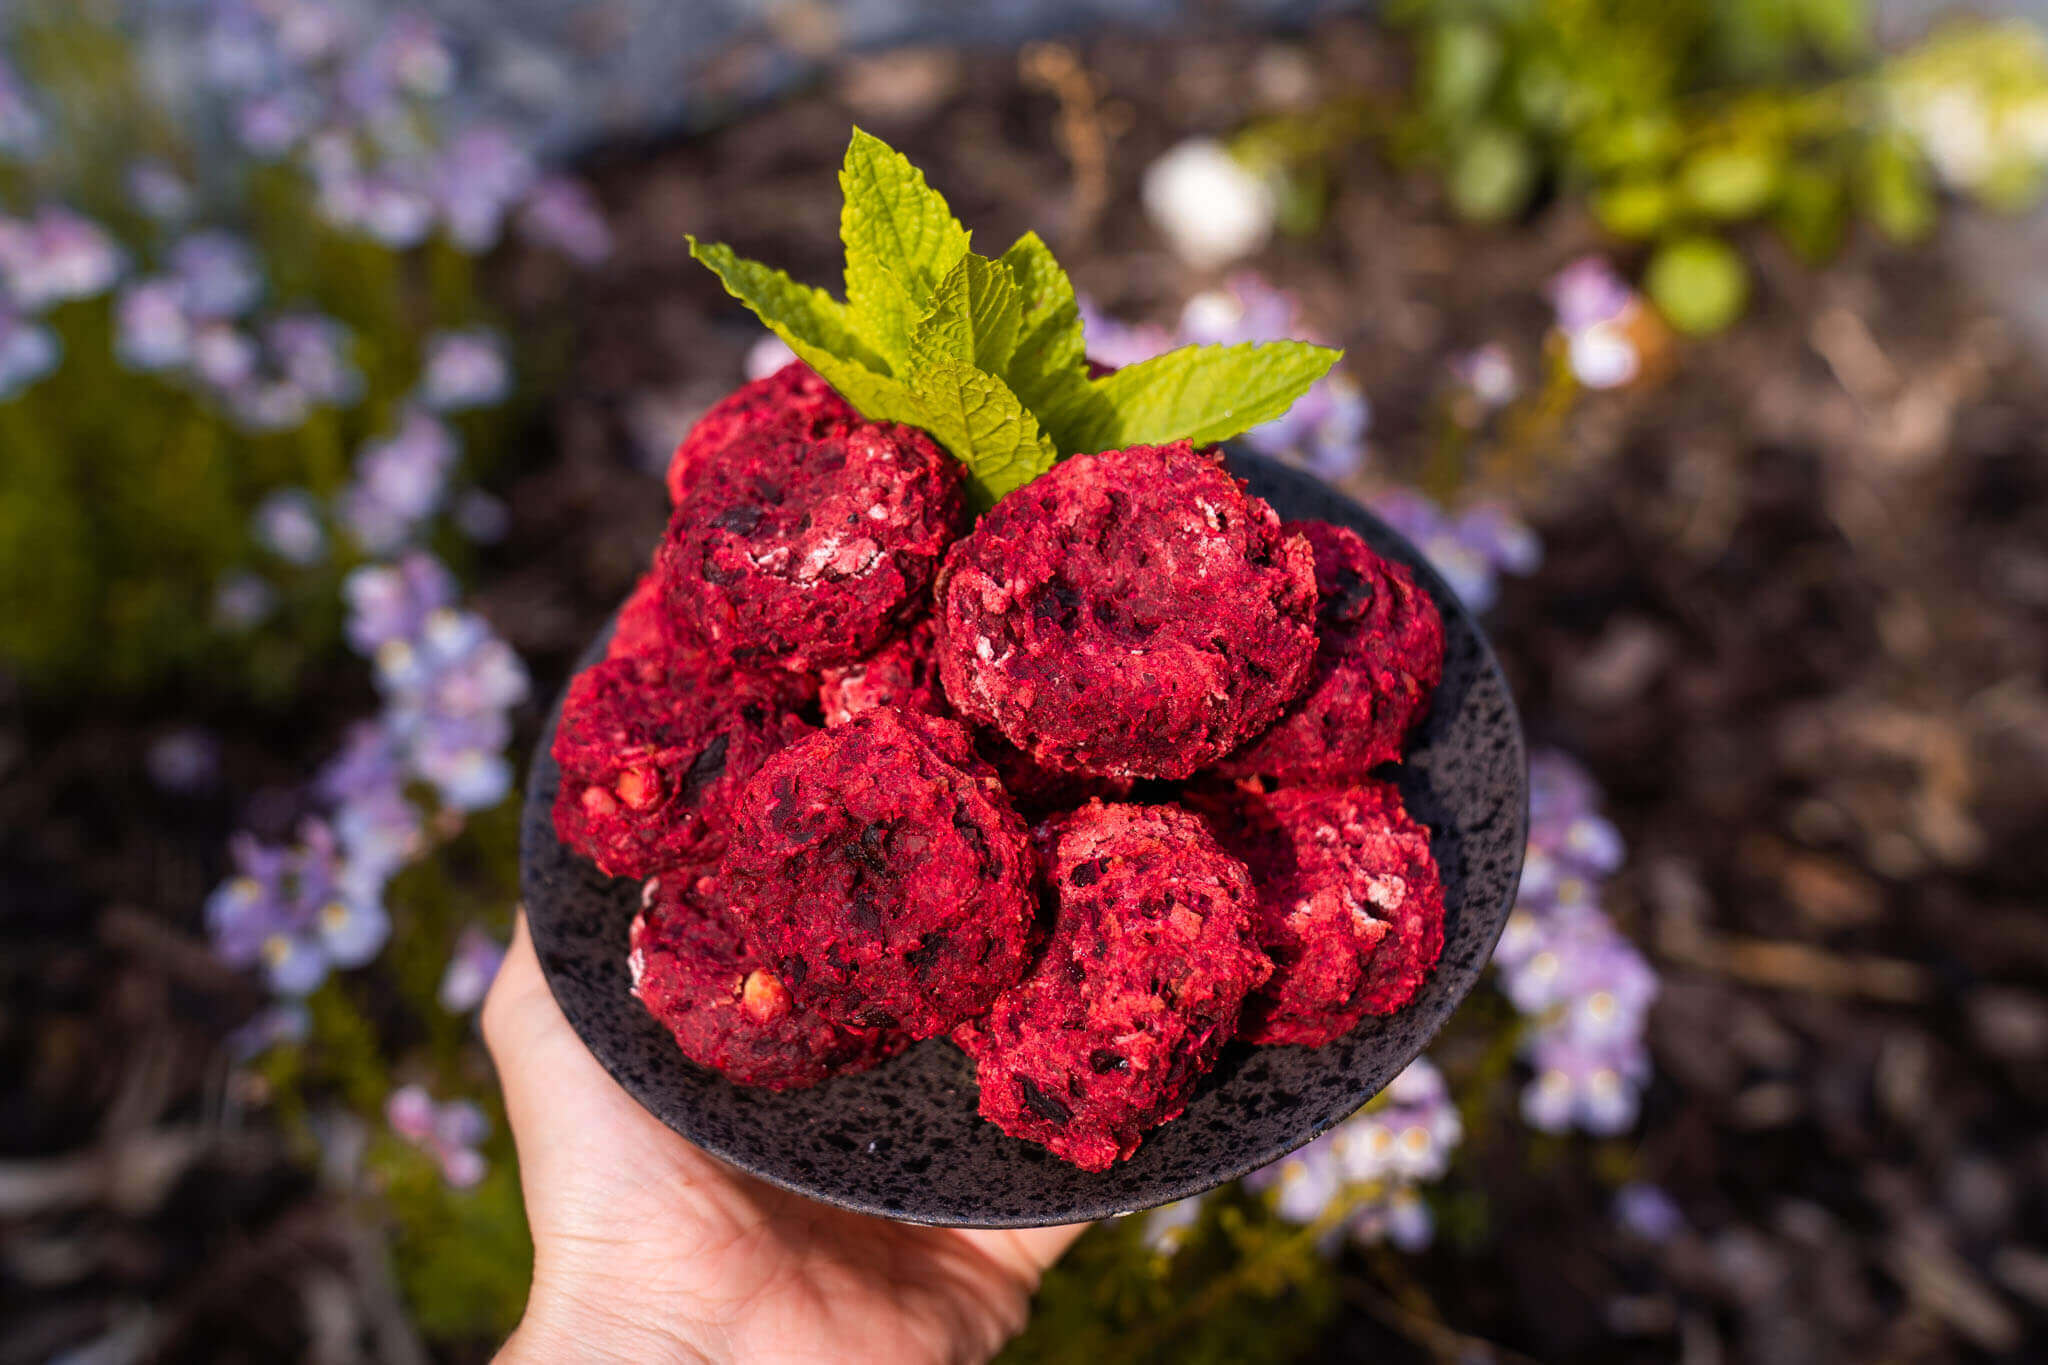 Beetroot and chickpea falafels